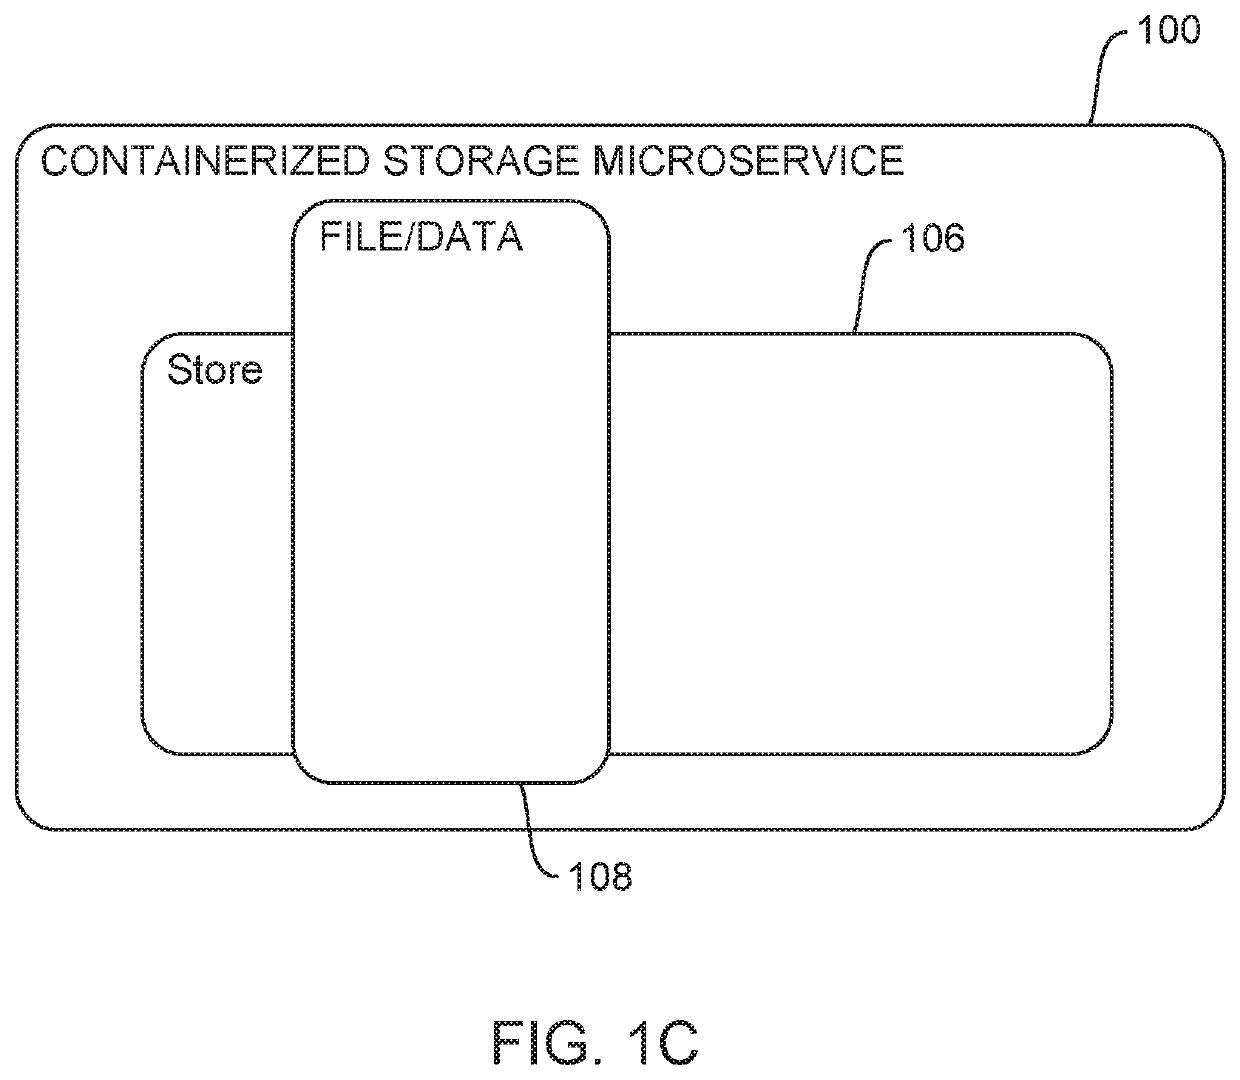 Containerized storage microservice with direct connection to requesting application container